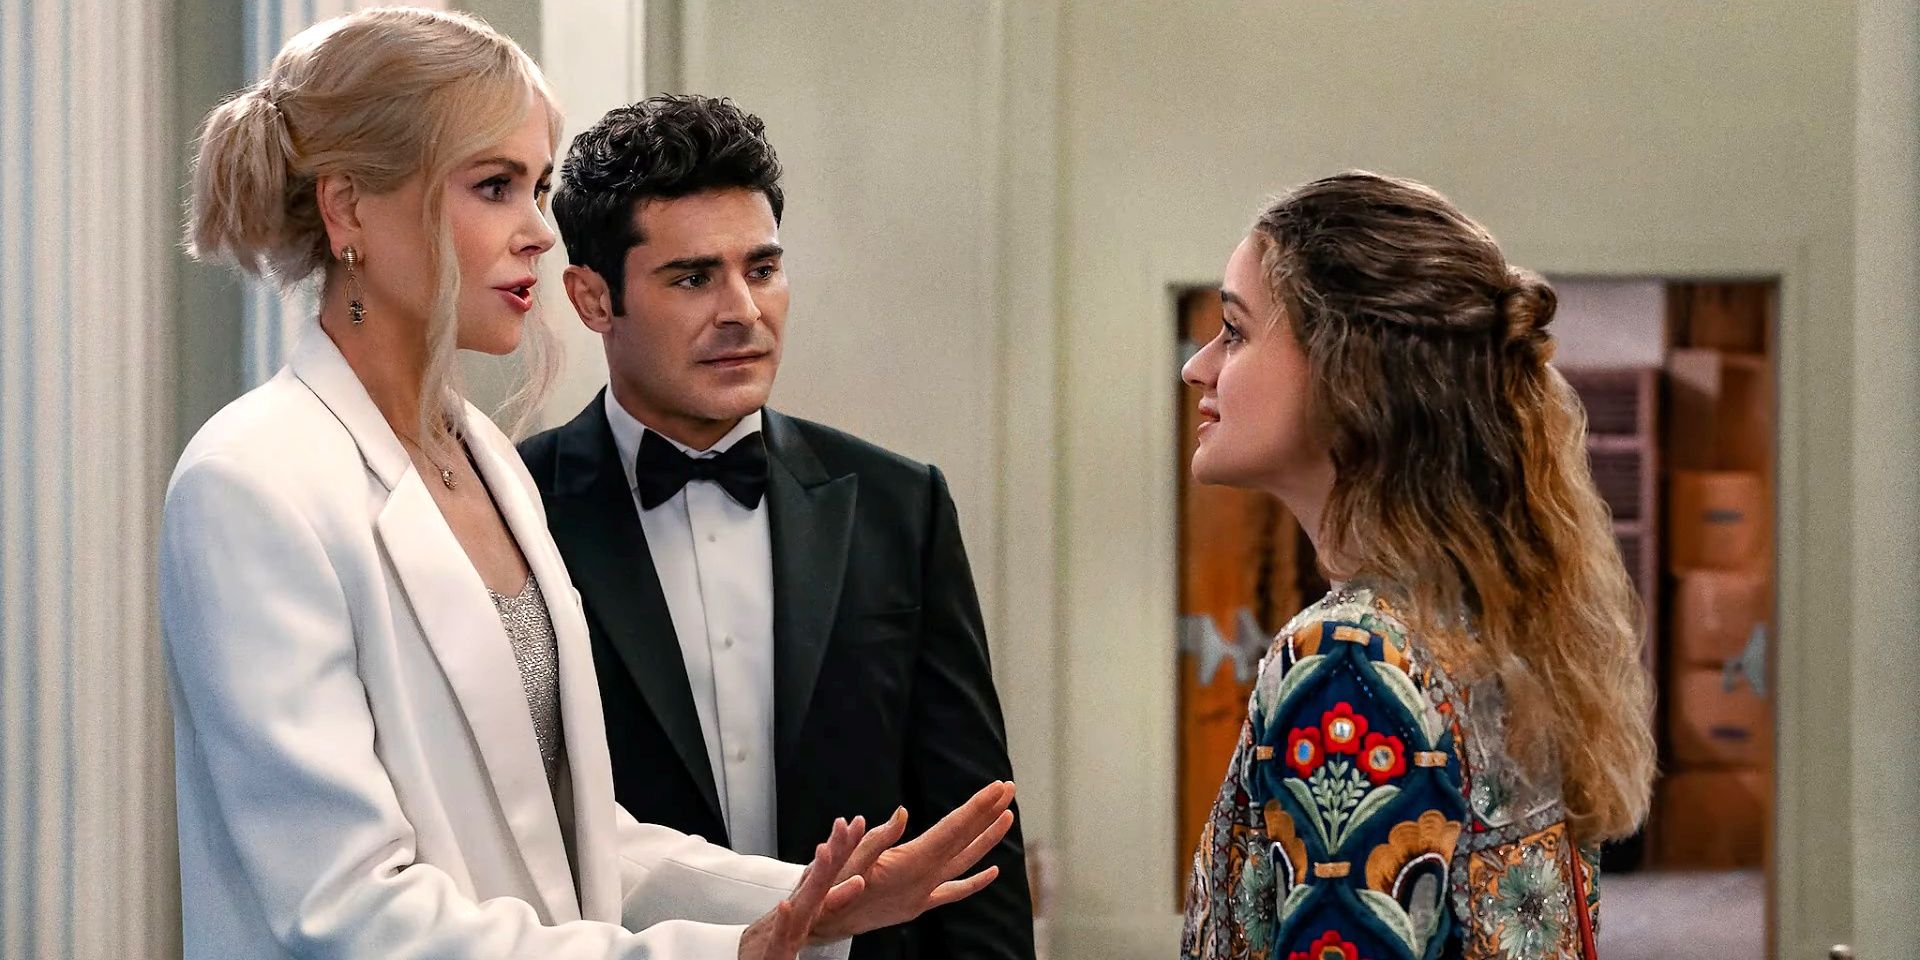 A Family Affair Age Gap Explained: How Much Older Nicole Kidman Is Than Zac Efron